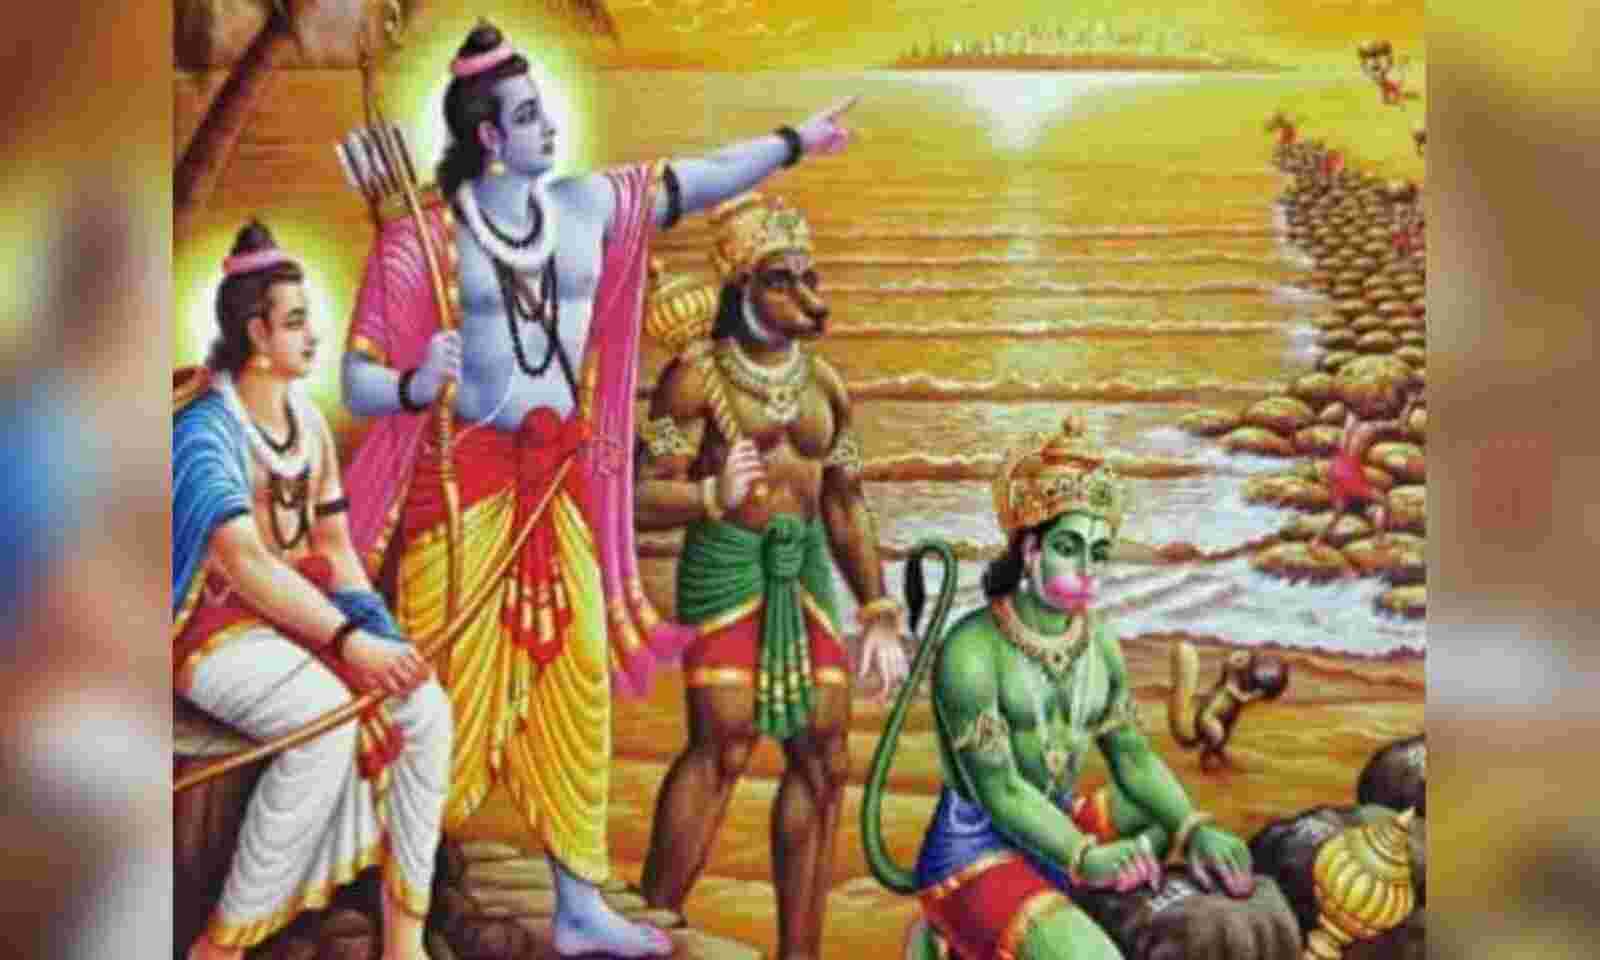 Global Encyclopaedia on Ramayana to be published in 200 volumes